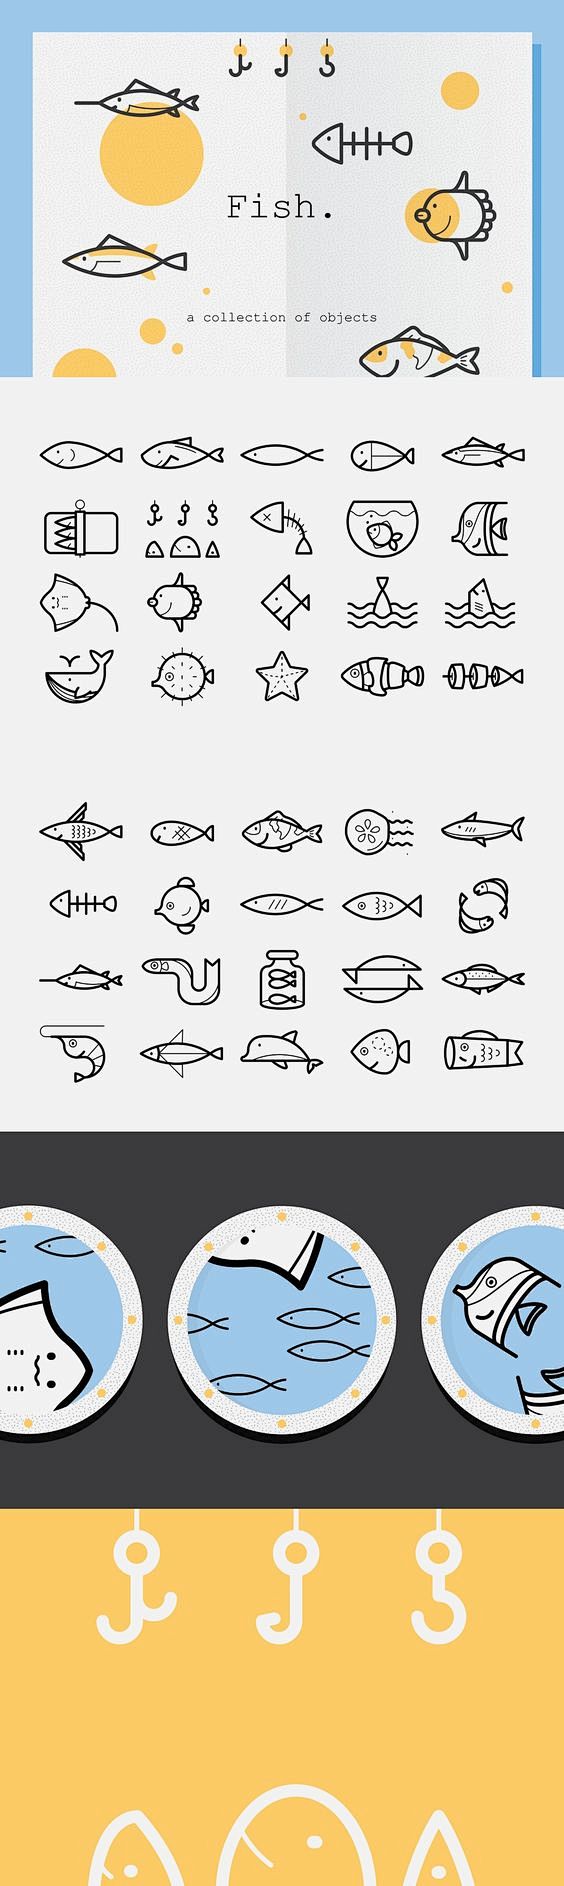 Fish Icons - An icon...